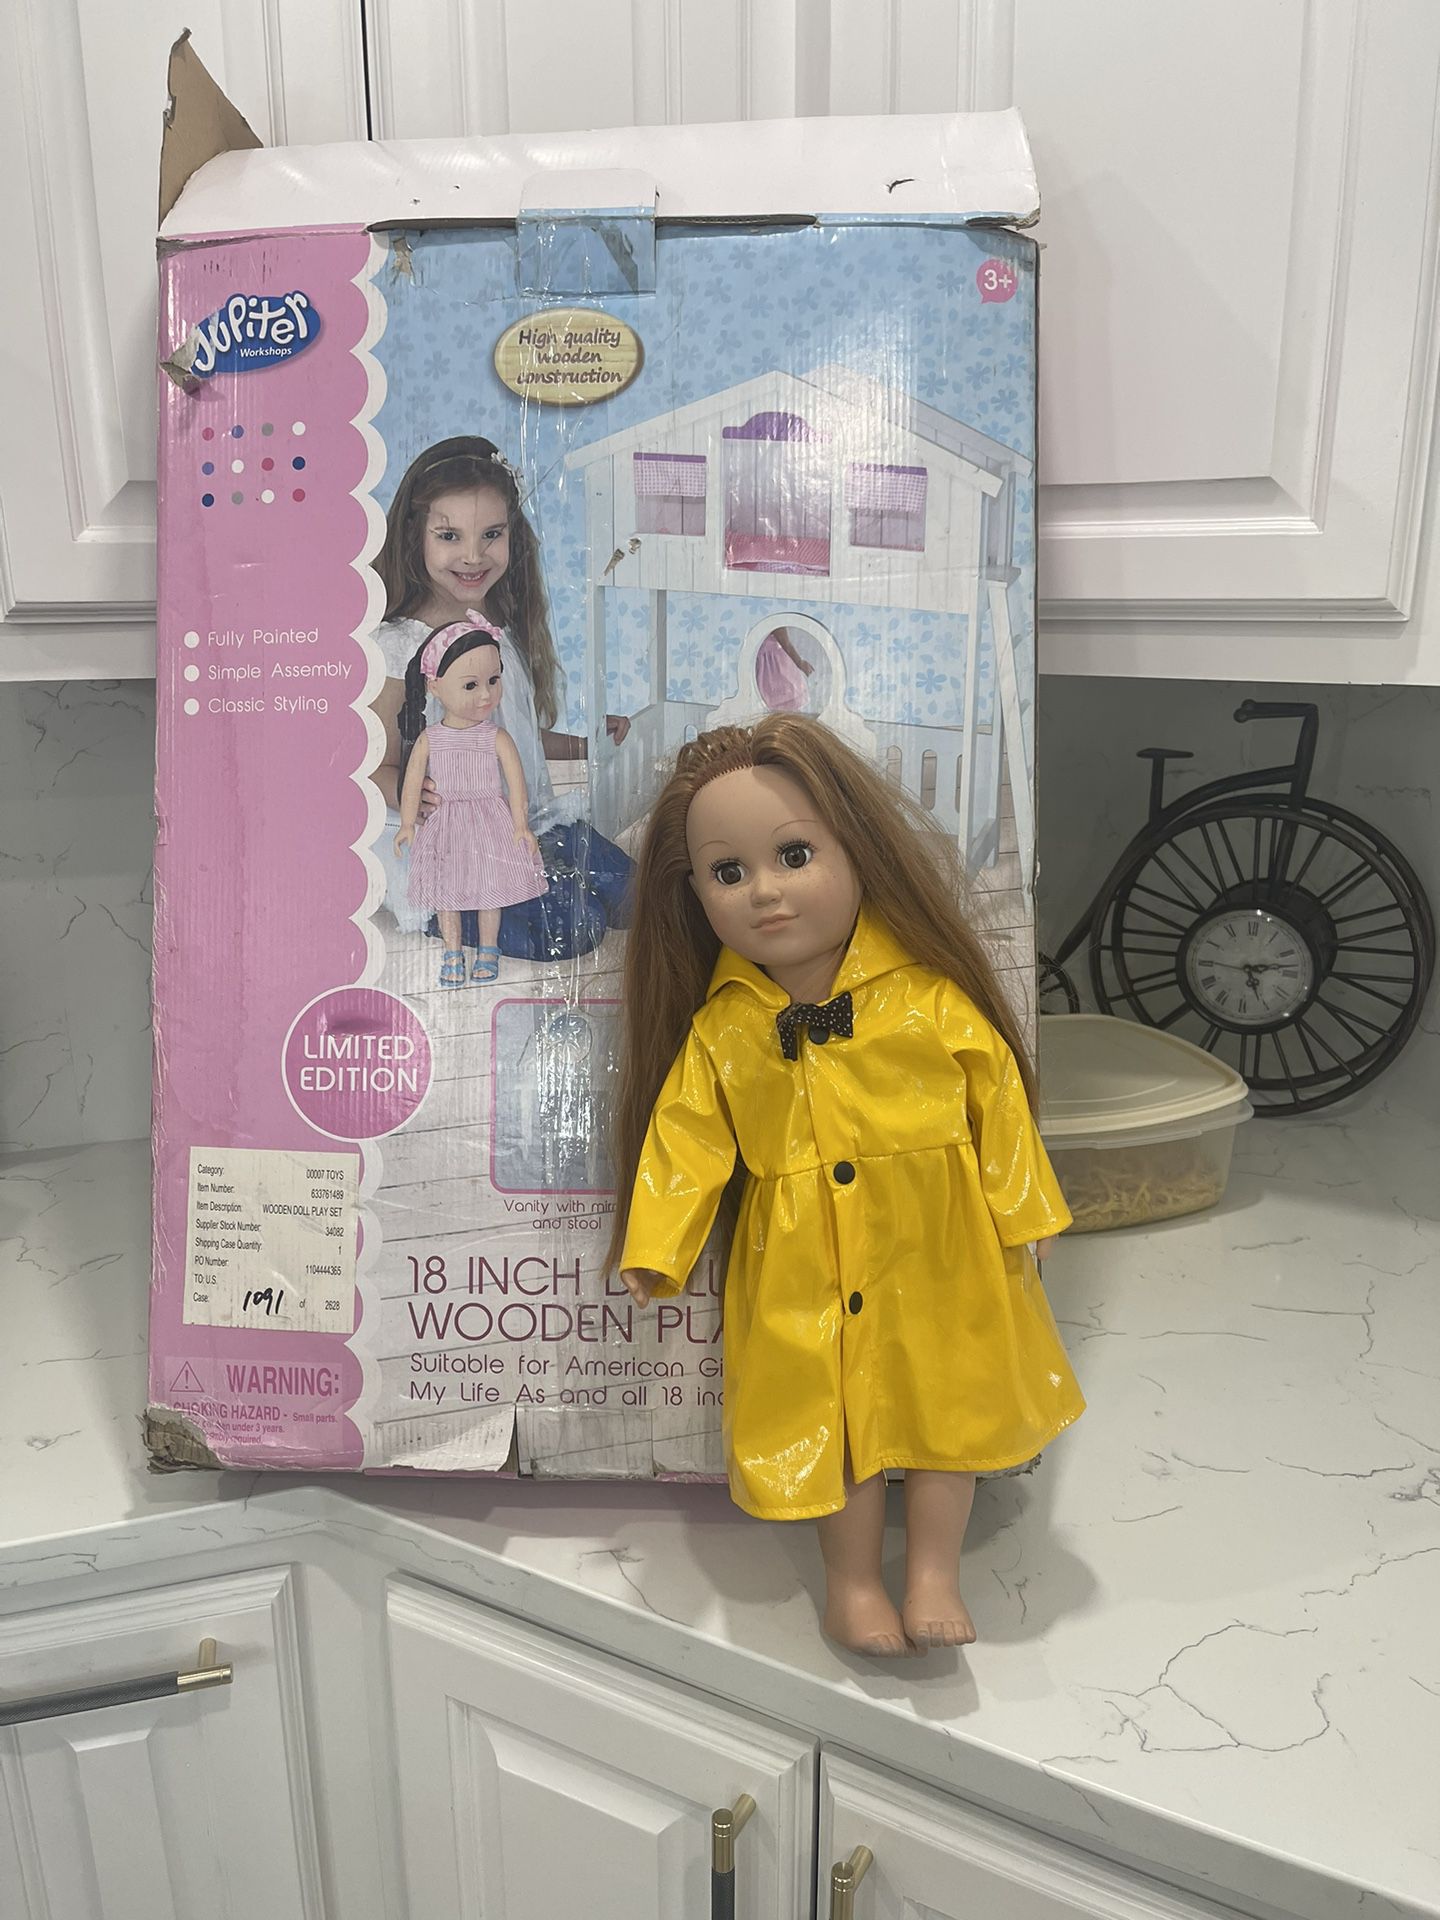 18” Doll Wooden play set Suitable  for American girl The Furniture is still in the box, the doll is used but in great condition 